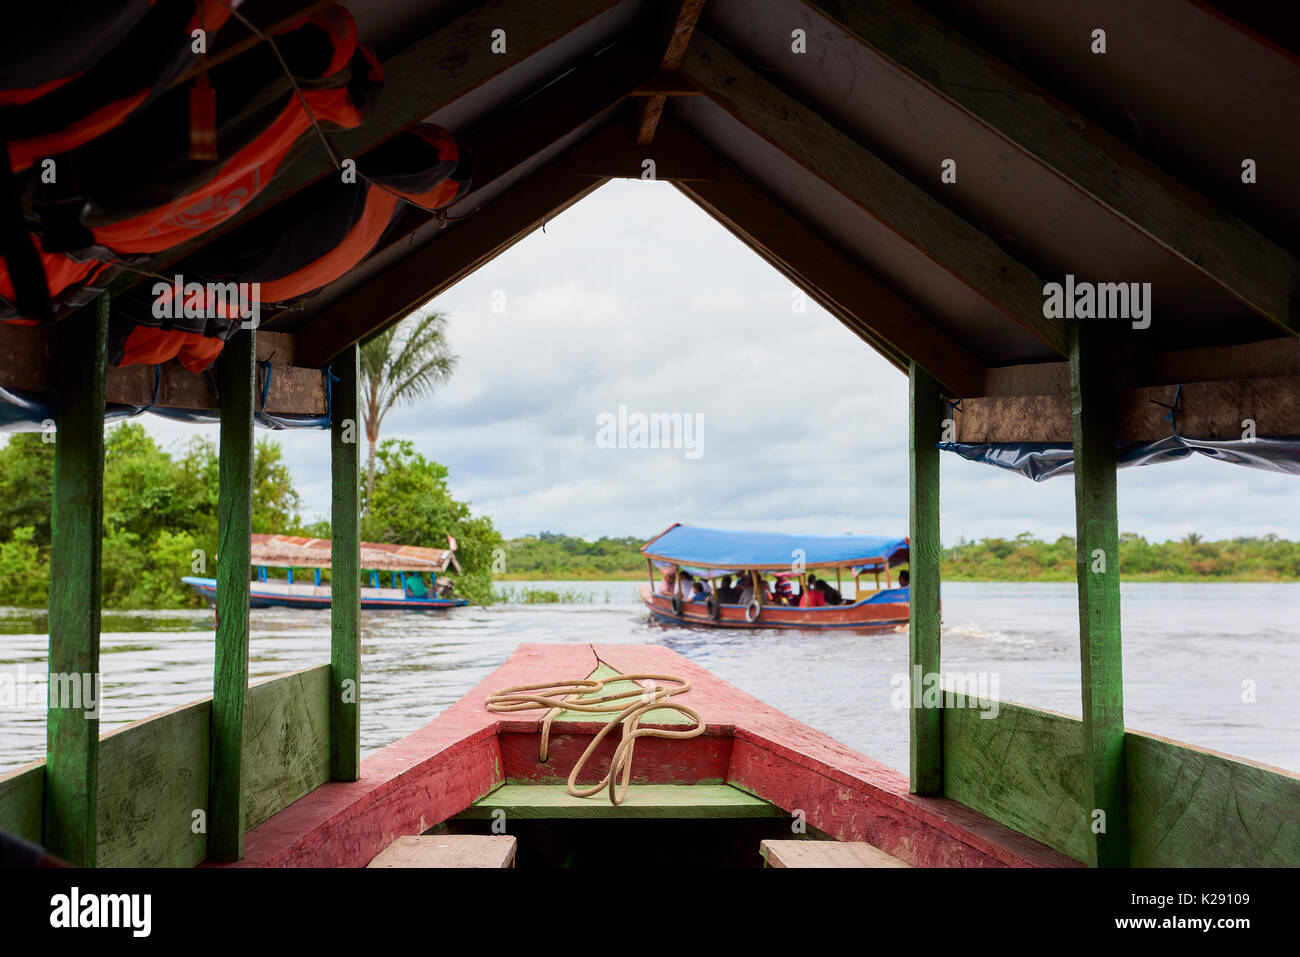 Riverboats in Nanay River, in Iquitos, Peru framed by boat structure. Nanay River connects the city to Amazon River. Stock Photo